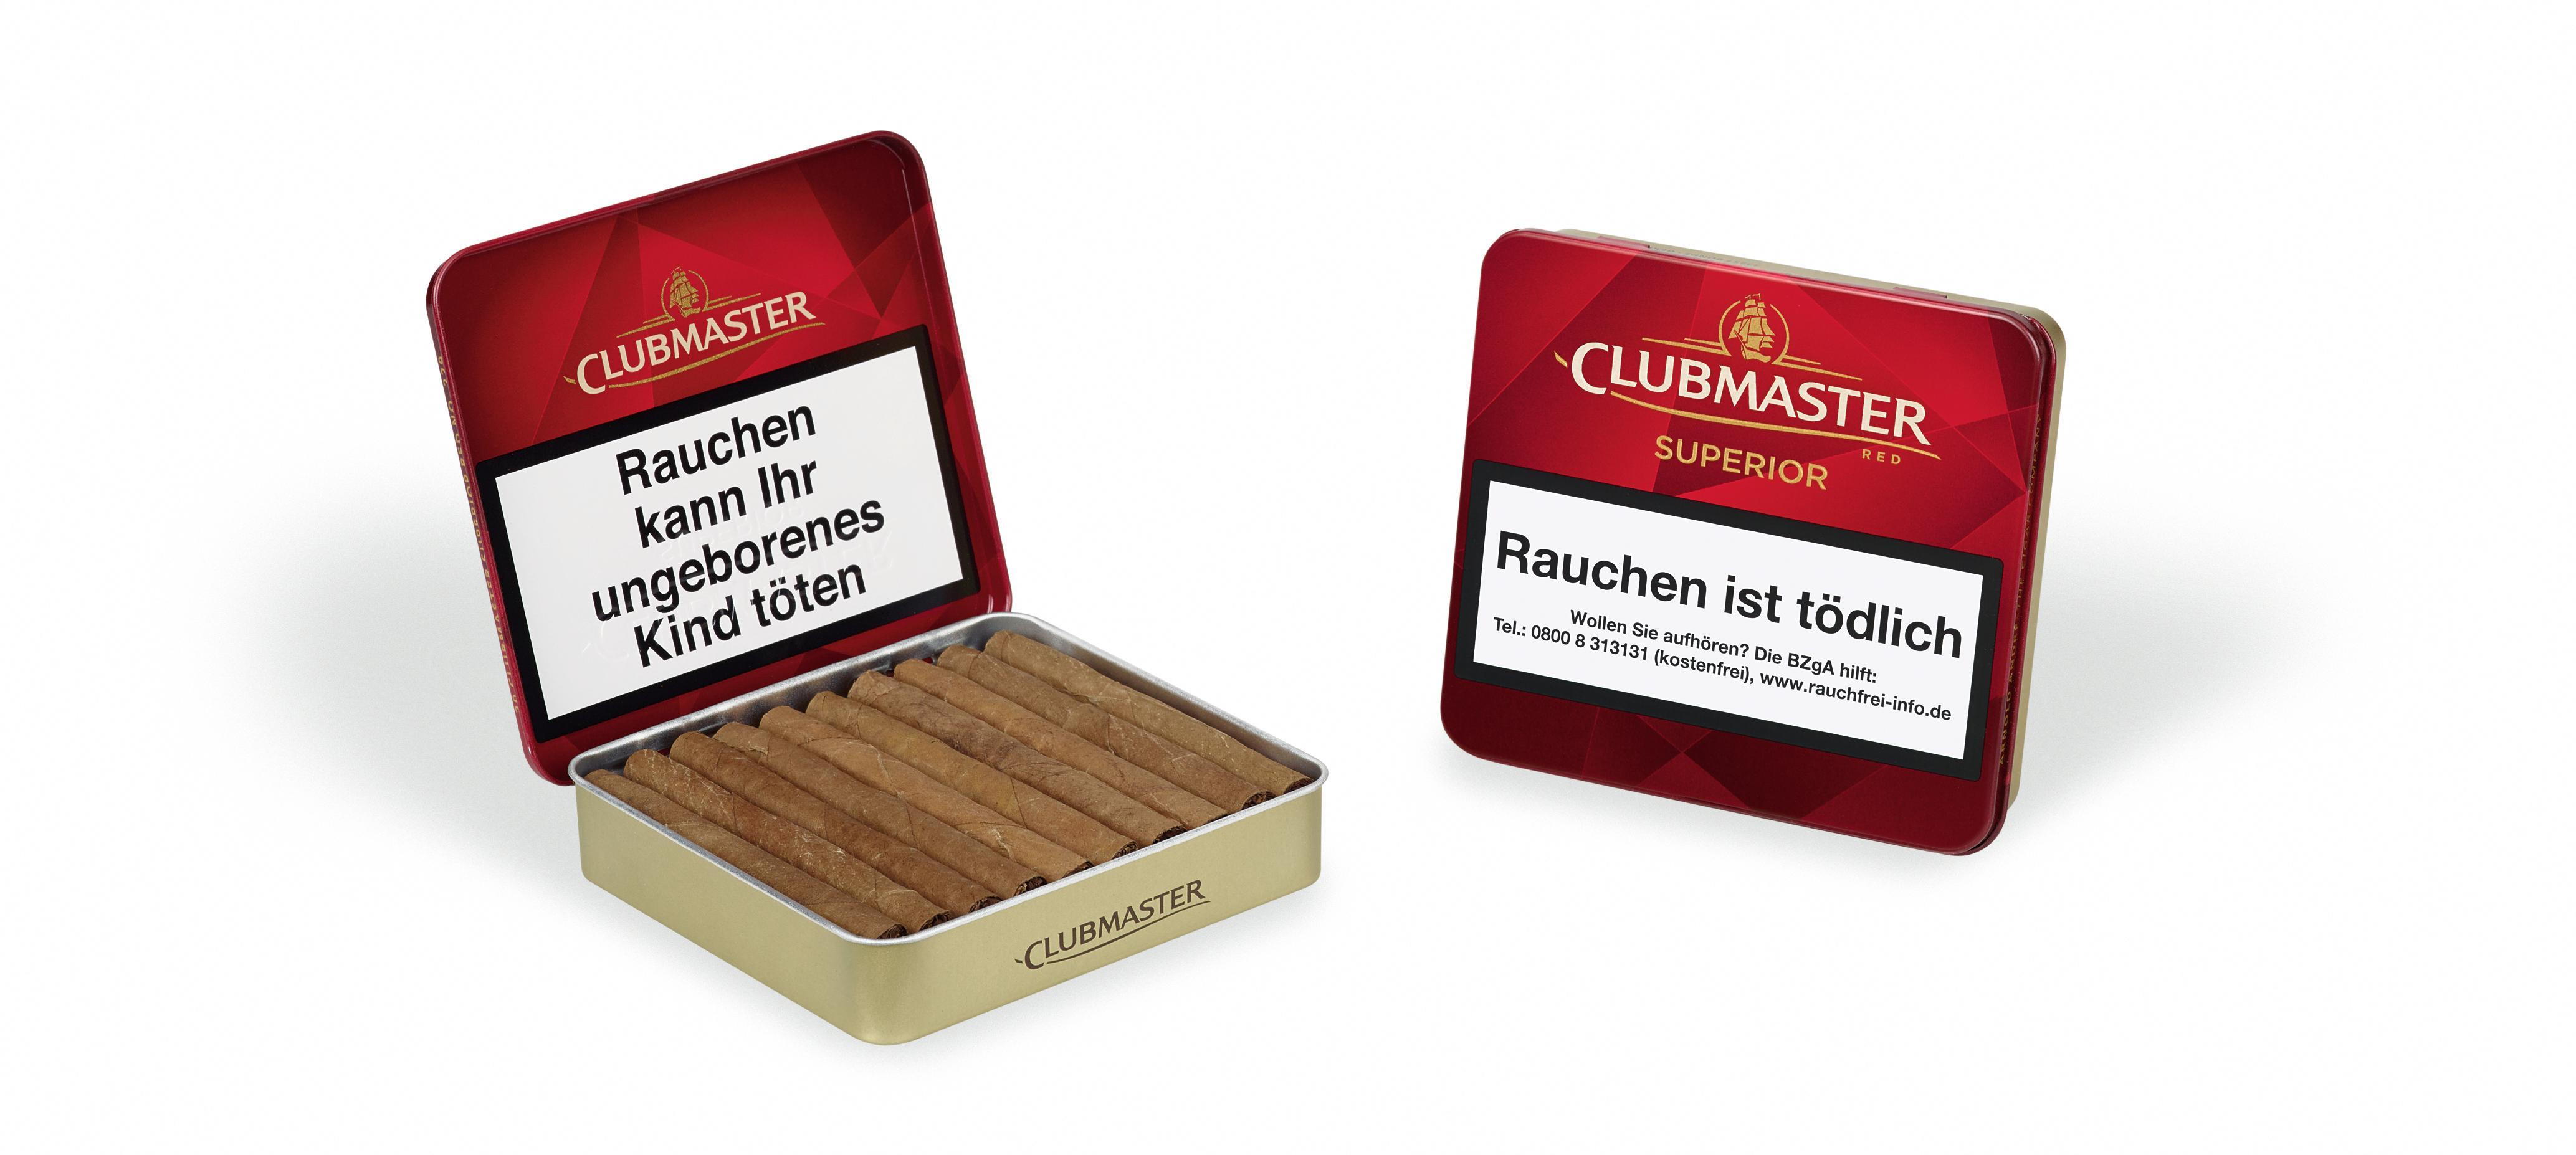 Clubmaster Superior Red ohne Filter Nr. 229 5 x 20 Zigarillos